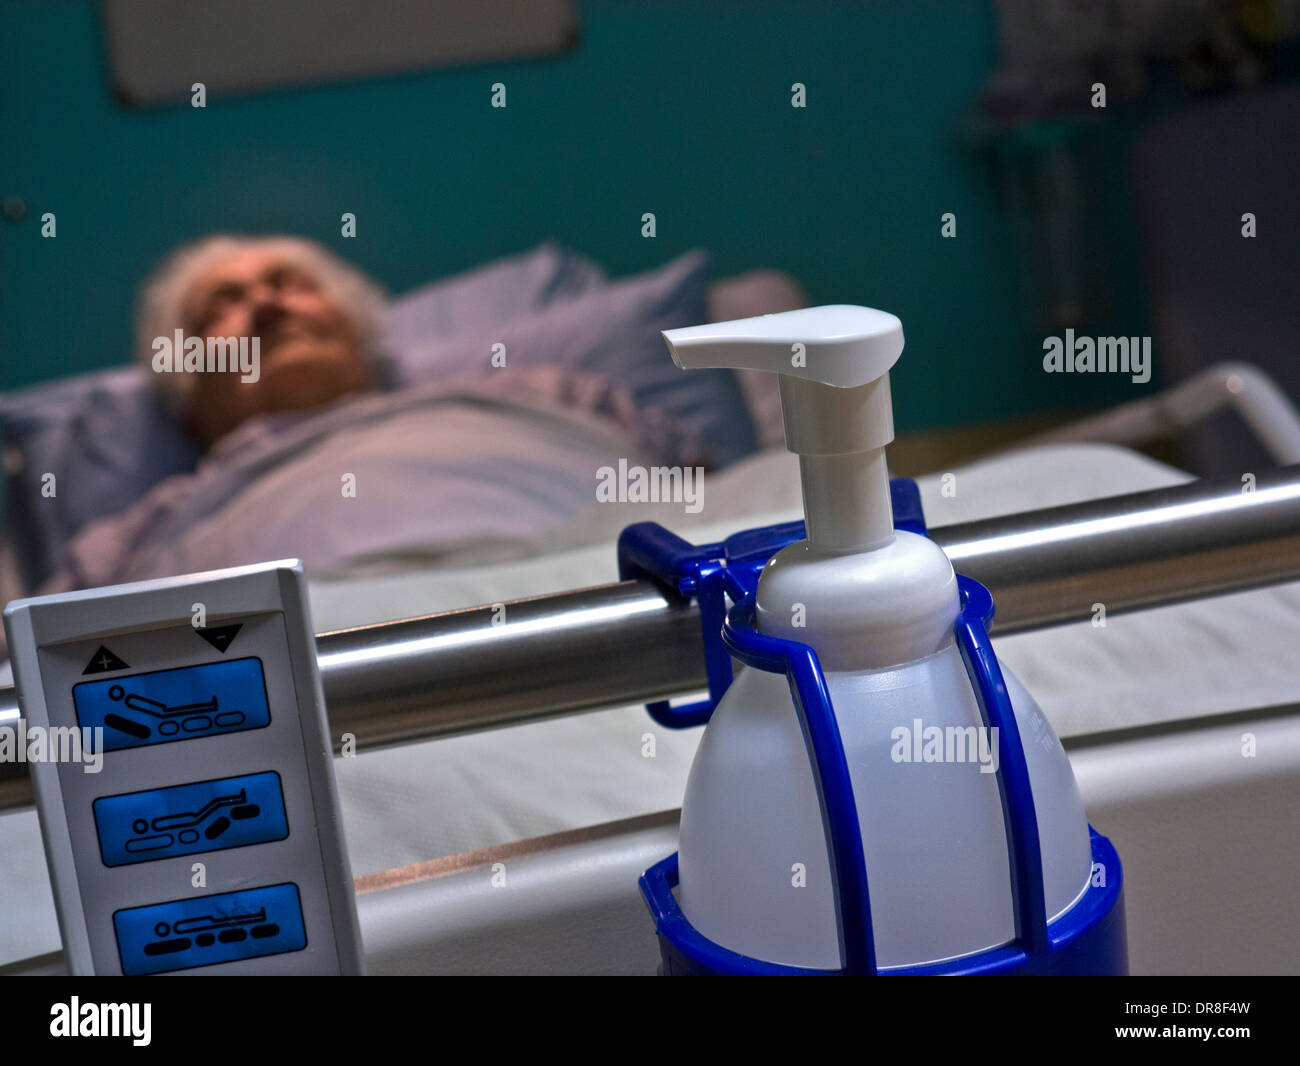 CORONAVIRUS Elderly lady in hospital bed with hygienic cleansing Covid-19 disease control anti-bacterial sanitiser hand washing bottle in foreground Stock Photo